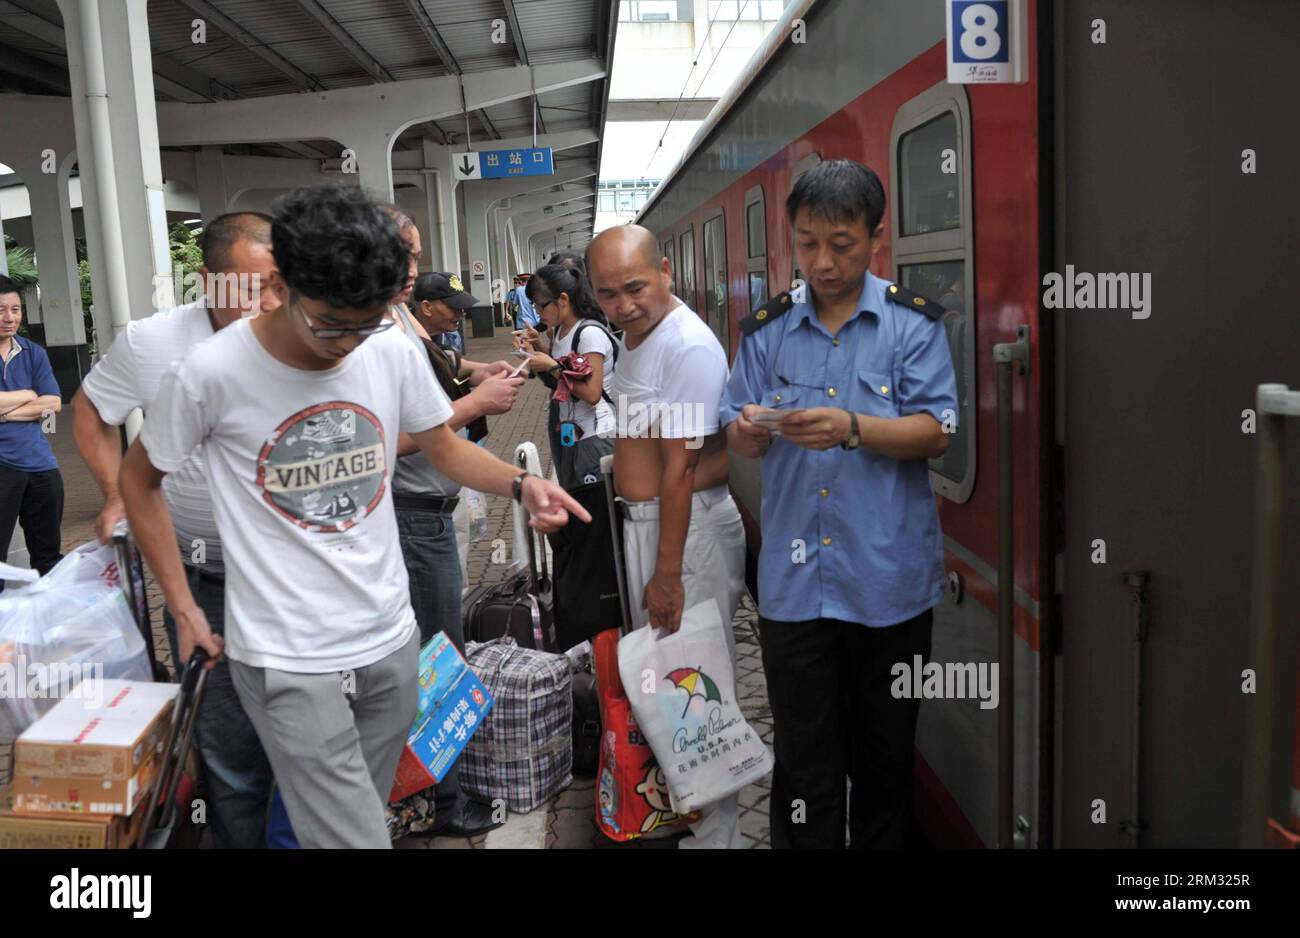 Bildnummer: 59930881  Datum: 02.07.2013  Copyright: imago/Xinhua (130702) -- HAIKOU, July 2, 2013 (Xinhua) -- Passengers have their tickets checked for the first direct train from Haikou to Harbin at the Haikou Railway Station in Haikou, capital of south China s Hainan Province, July 2, 2013. The train K1122/3 from south China s Haikou to northeast China s Heilongjiang left Haikou Tuesday, a day later than its original departure date due to the tropical storm Rumbia. The train which travels 4,458 kilometers for 65 hours has connected China s southernmost capital city Haikou of Hainan Province Stock Photo